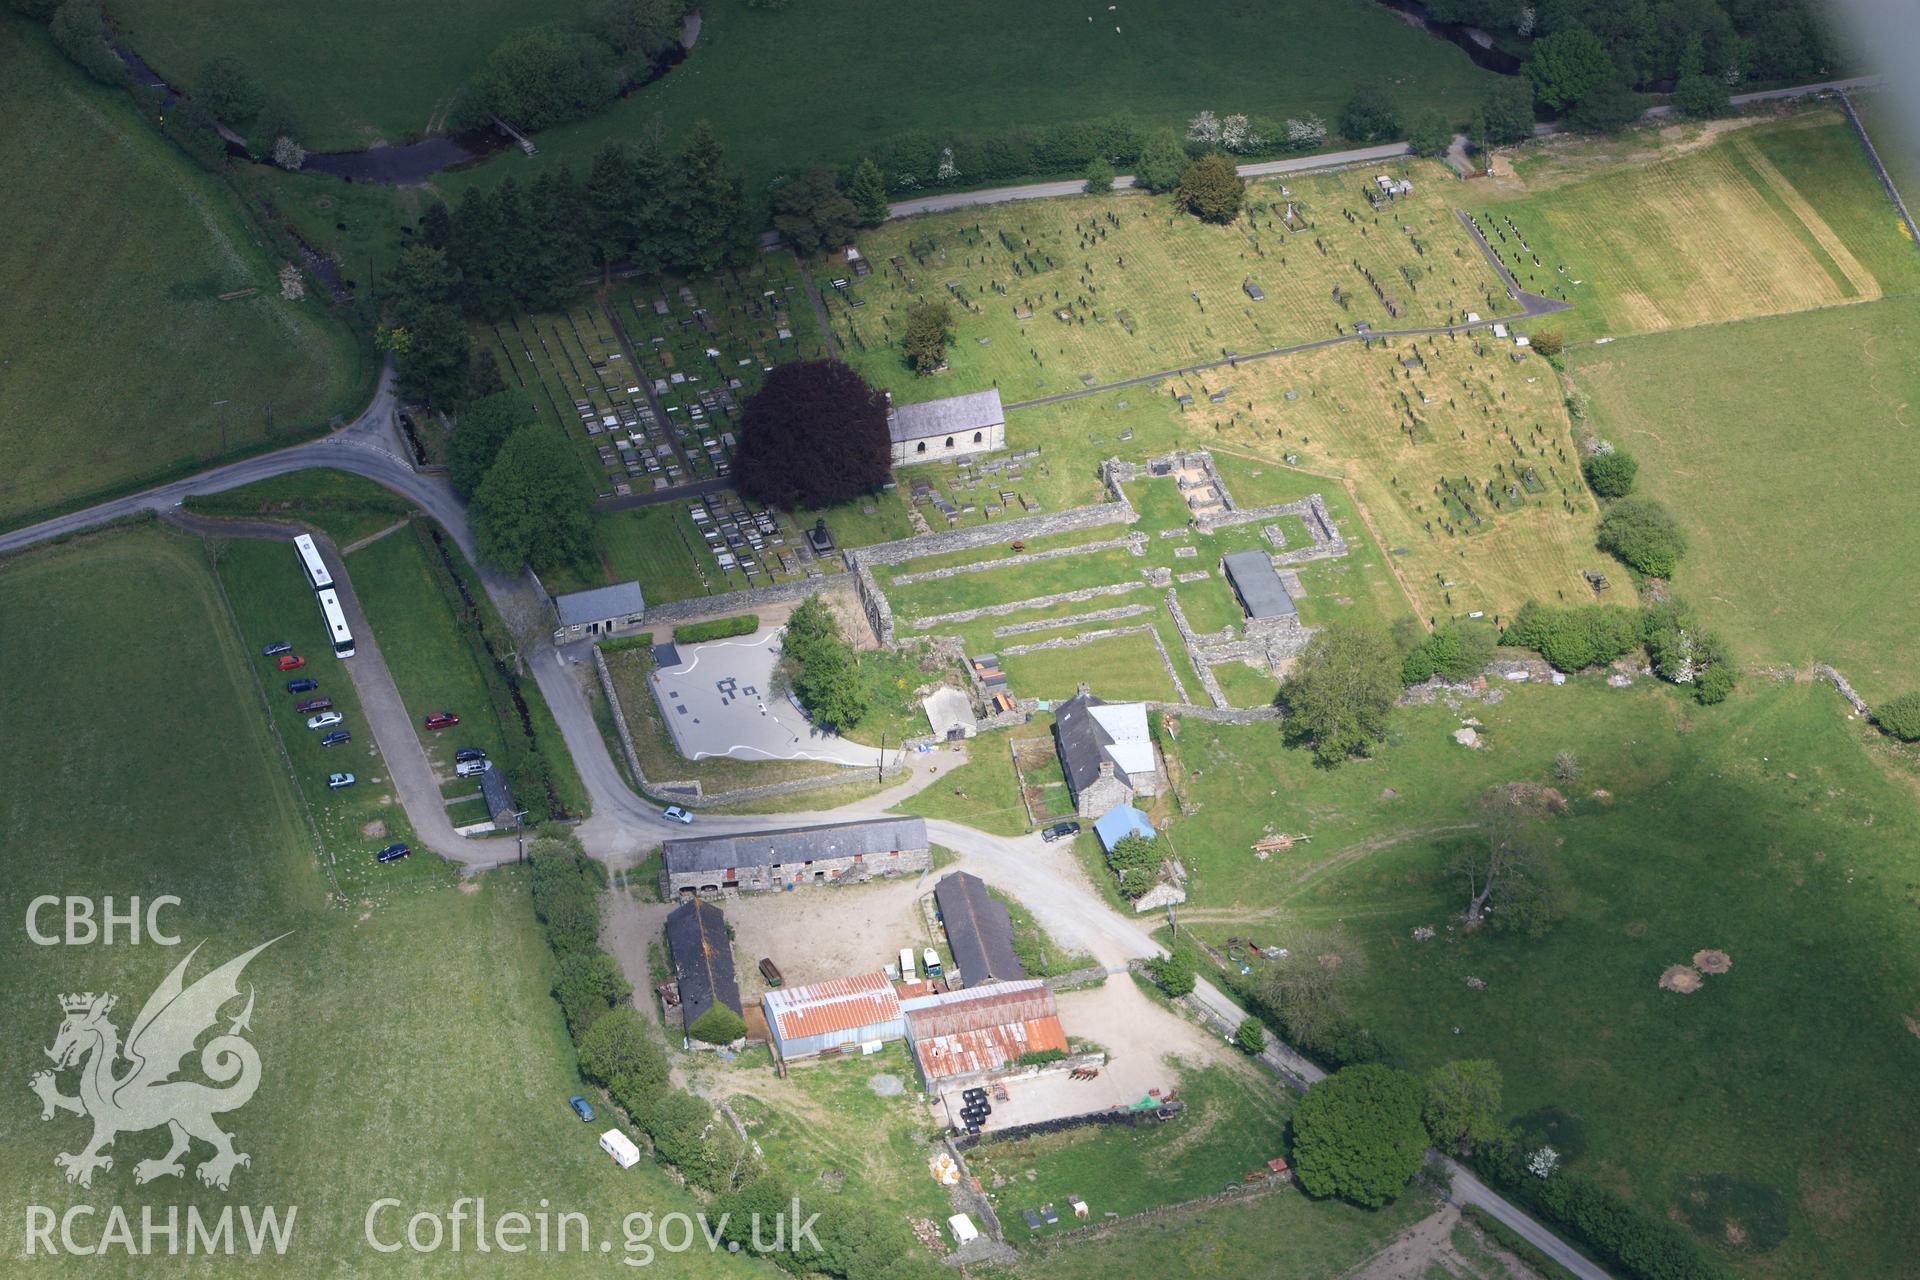 RCAHMW colour oblique photograph of Long View of Strata Florida Abbey. Taken by Toby Driver on 28/05/2012.